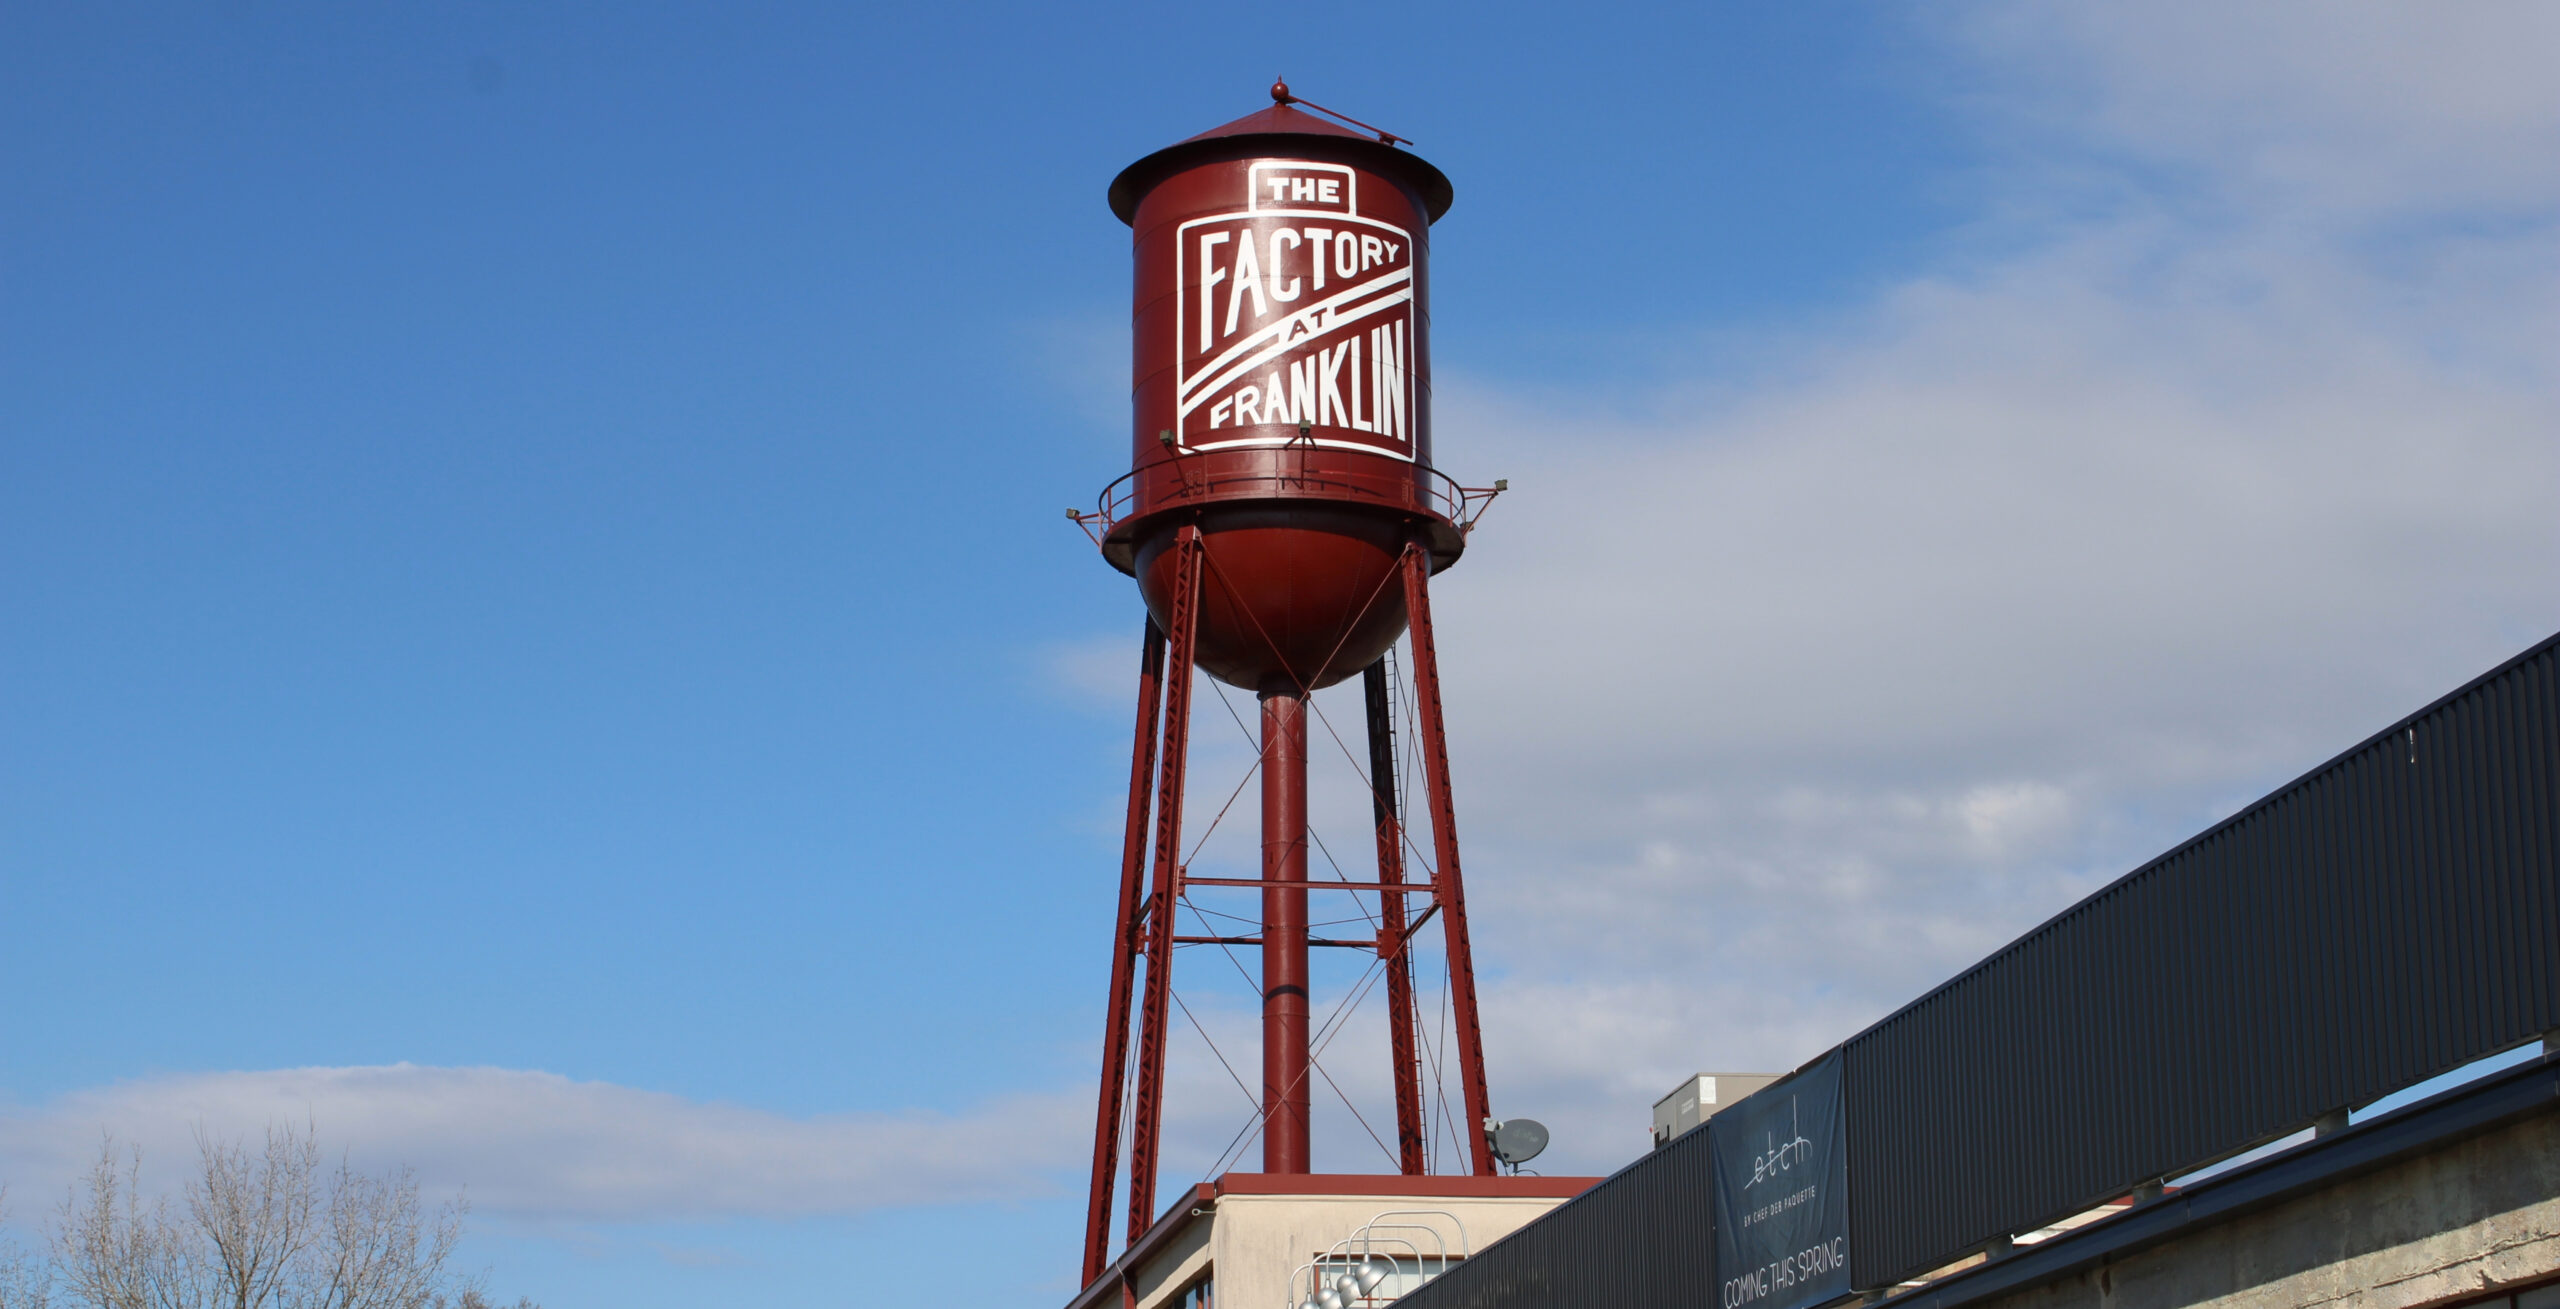 The Factory at Franklin water tower.